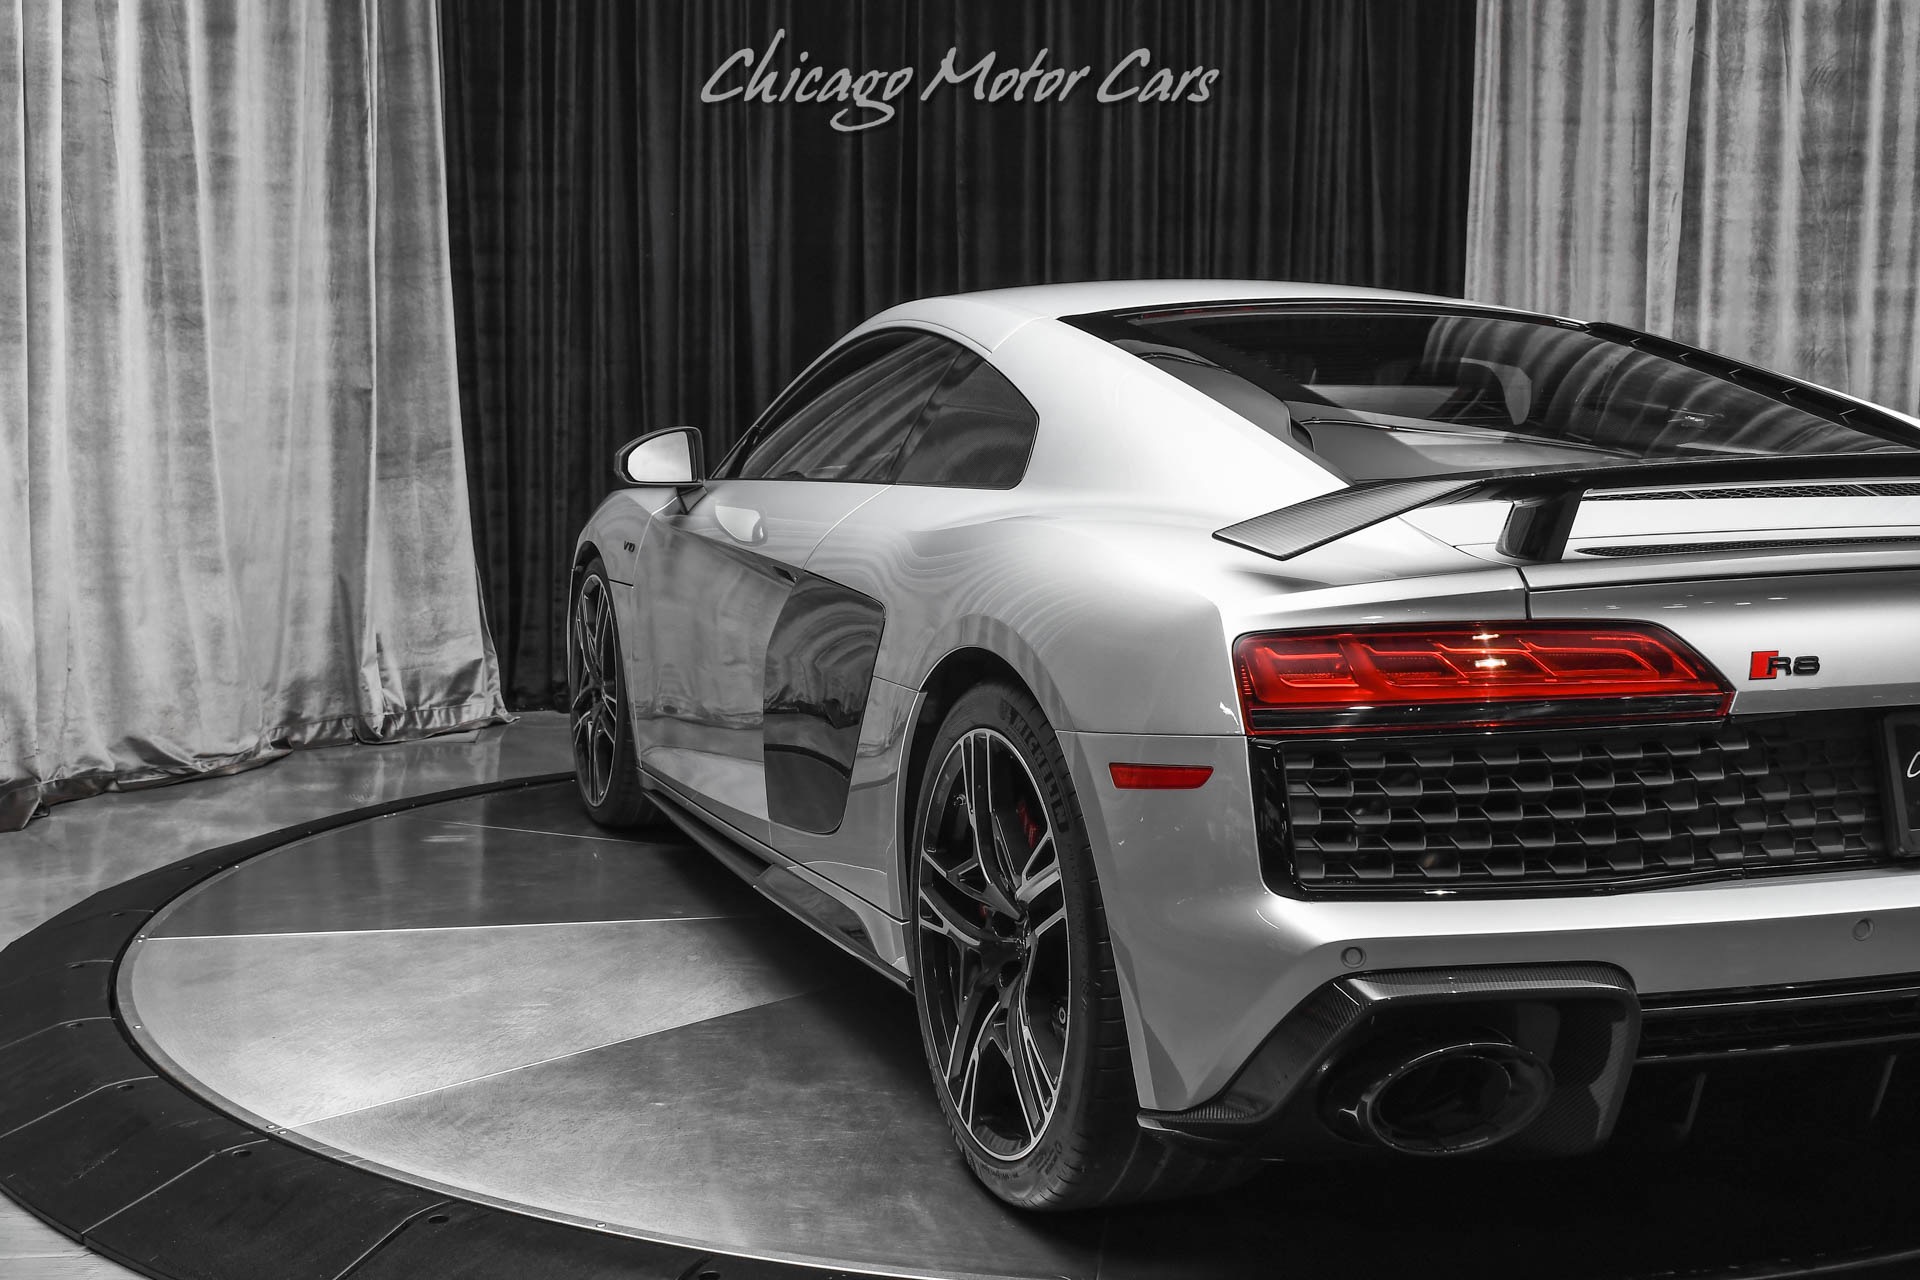 Used-2020-Audi-R8-52-quattro-V10-performance-Coupe-Carbon-Pkg-B-O-Front-PPF-LOADED